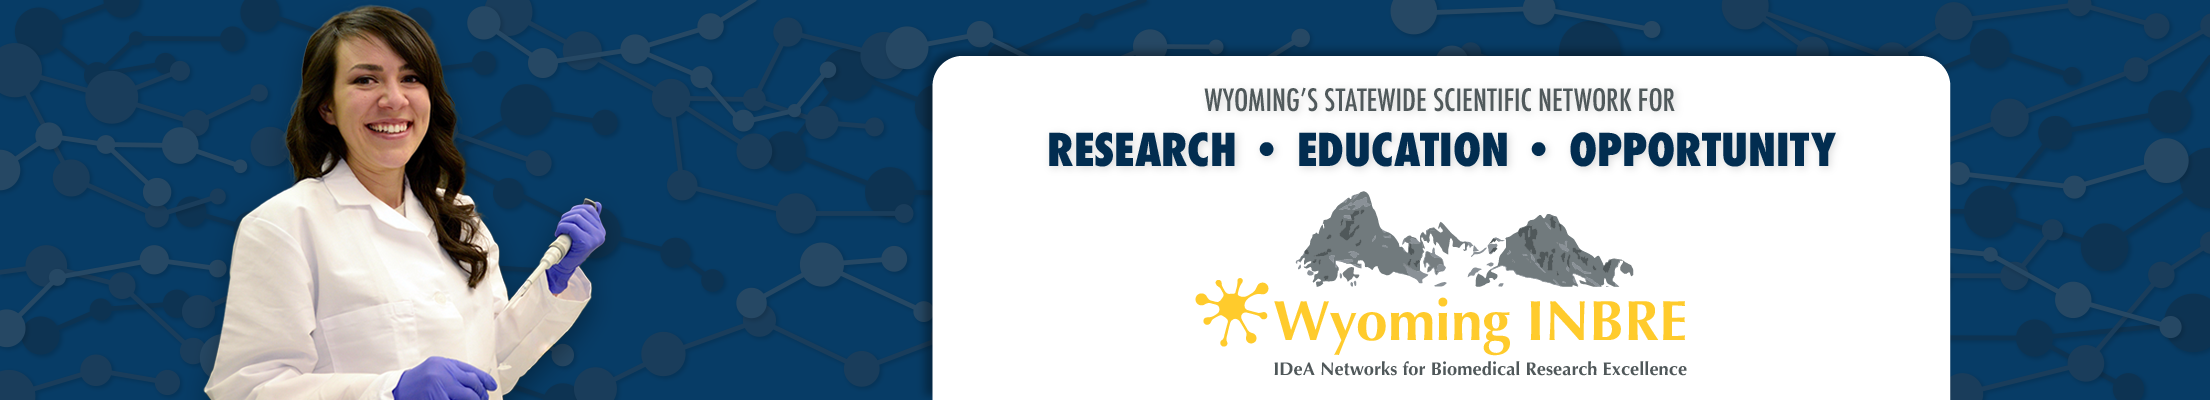 Wyoming INBRE grad student and logo with tagline